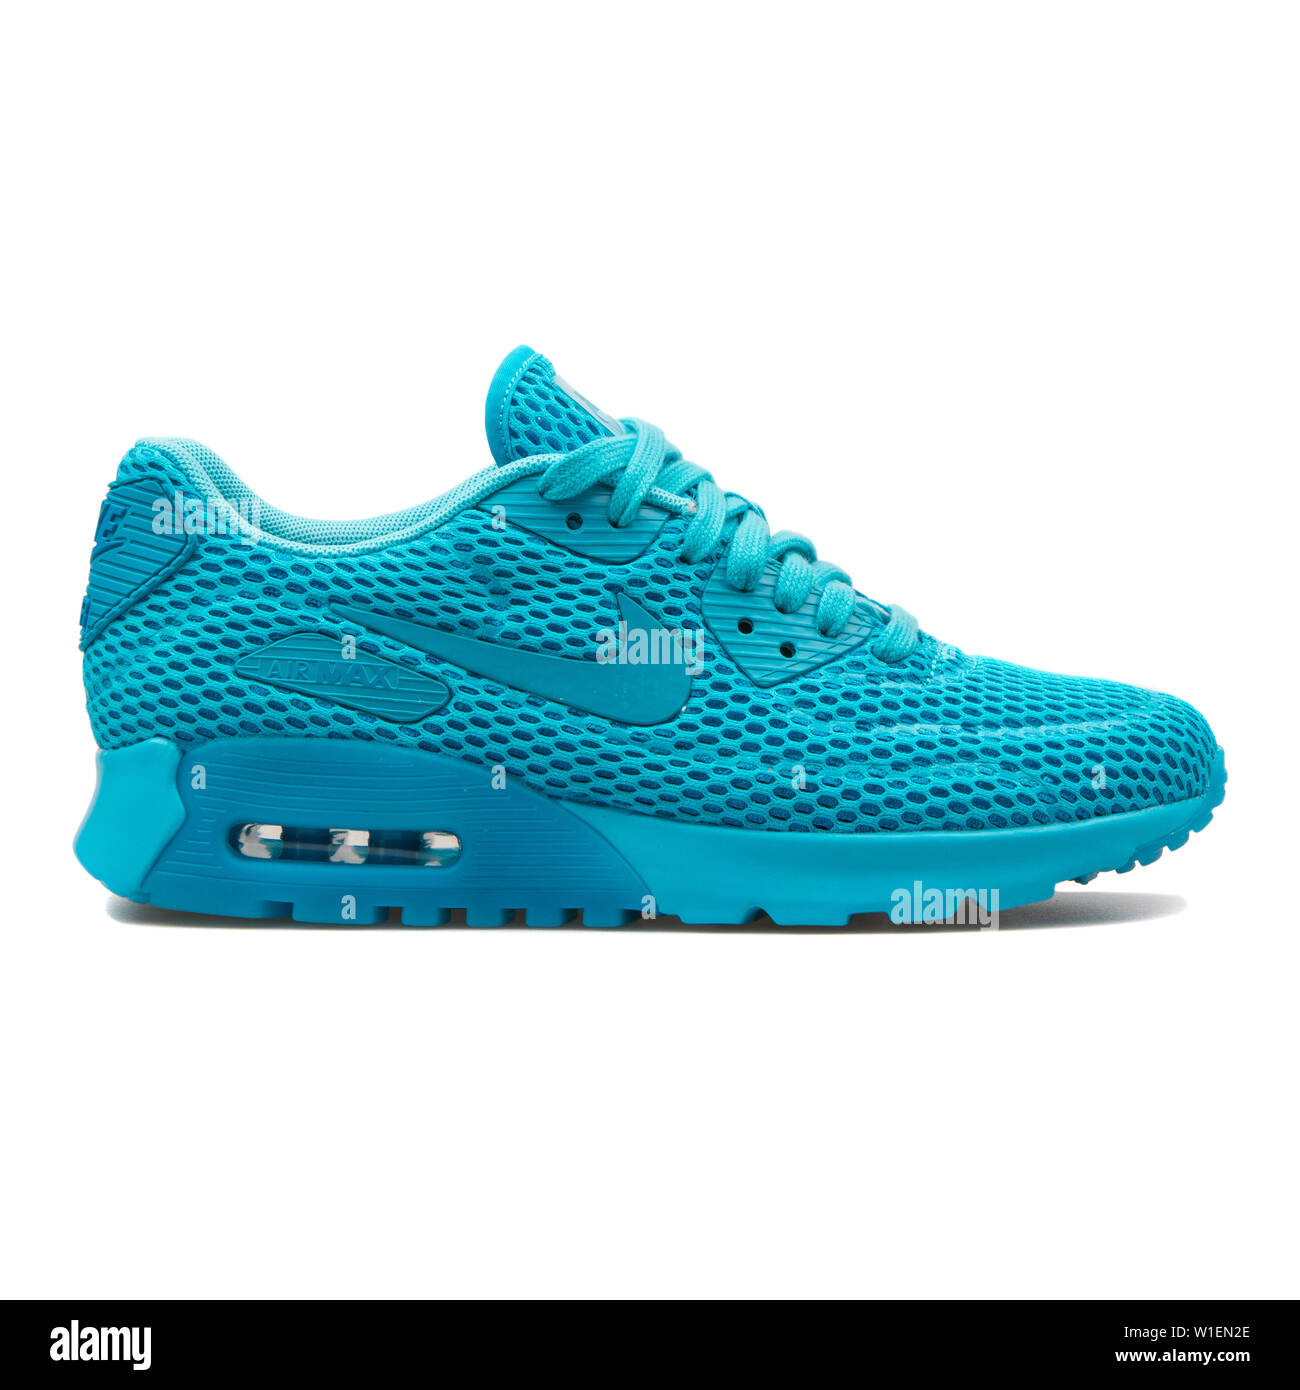 VIENNA, AUSTRIA - AUGUST 30, 2017: Nike Air Max 90 Ultra BR blue sneaker on  white background Stock Photo - Alamy